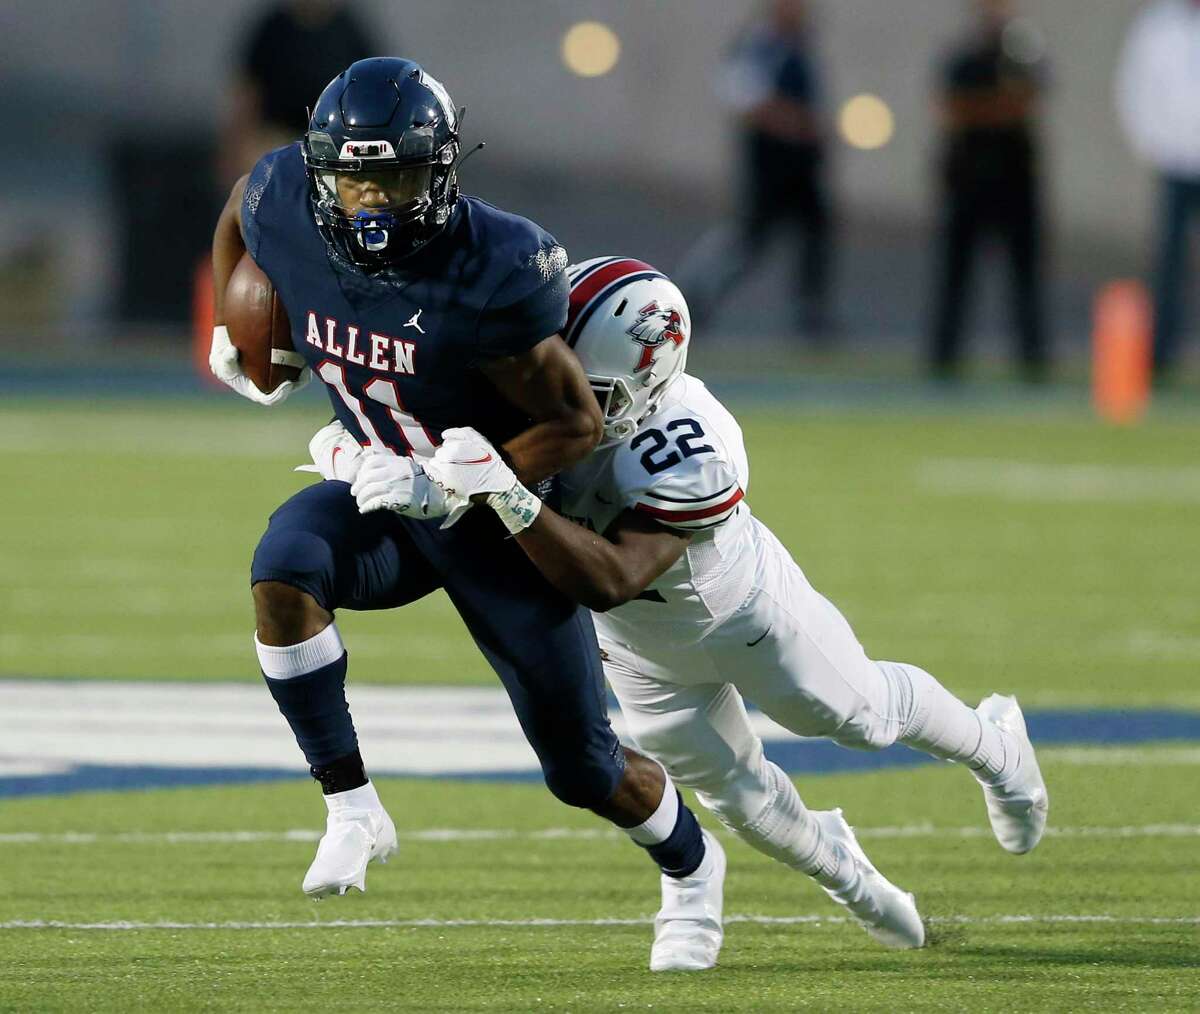 Allen's Jordan Johnson (11) is brought down by Humble Atascocita's Davon Bacon (22) during a run play in the first quarter of play at Eagle Stadium in Allen, Texas on Friday, October 2, 2020. (Vernon Bryant/The Dallas Morning News)